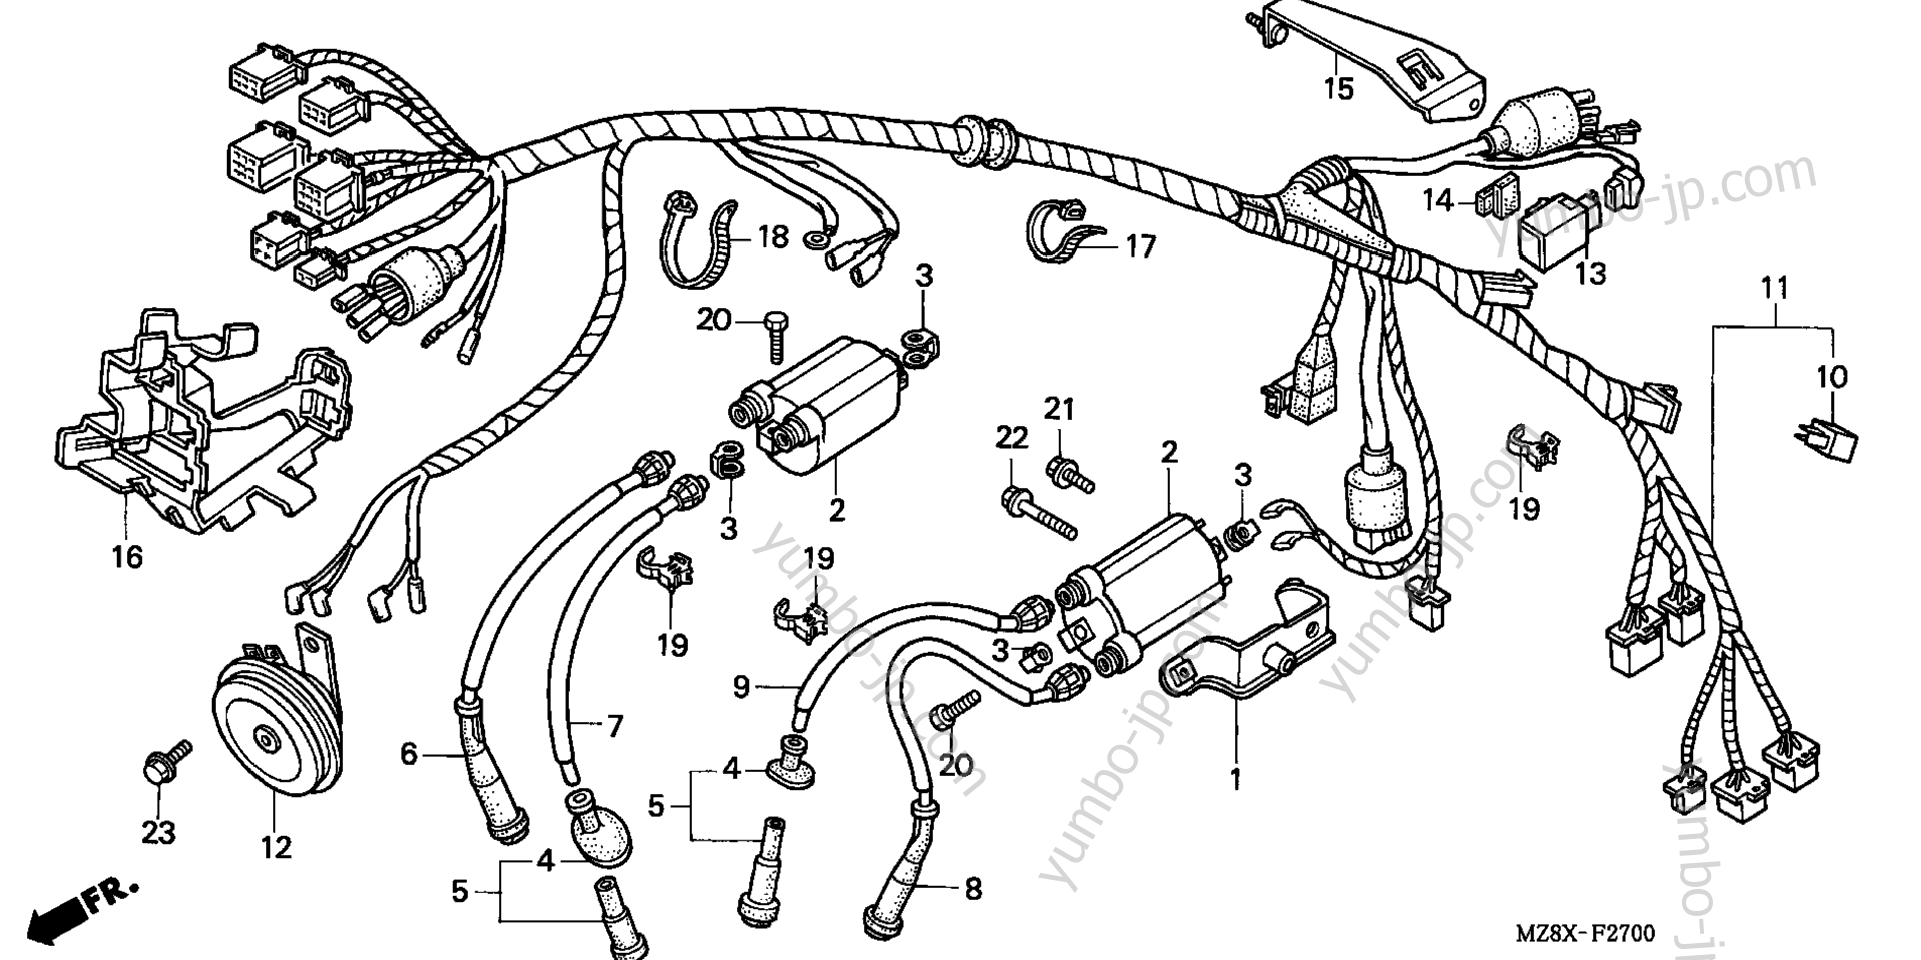 WIRE HARNESS for motorcycles HONDA VT600C A 2004 year